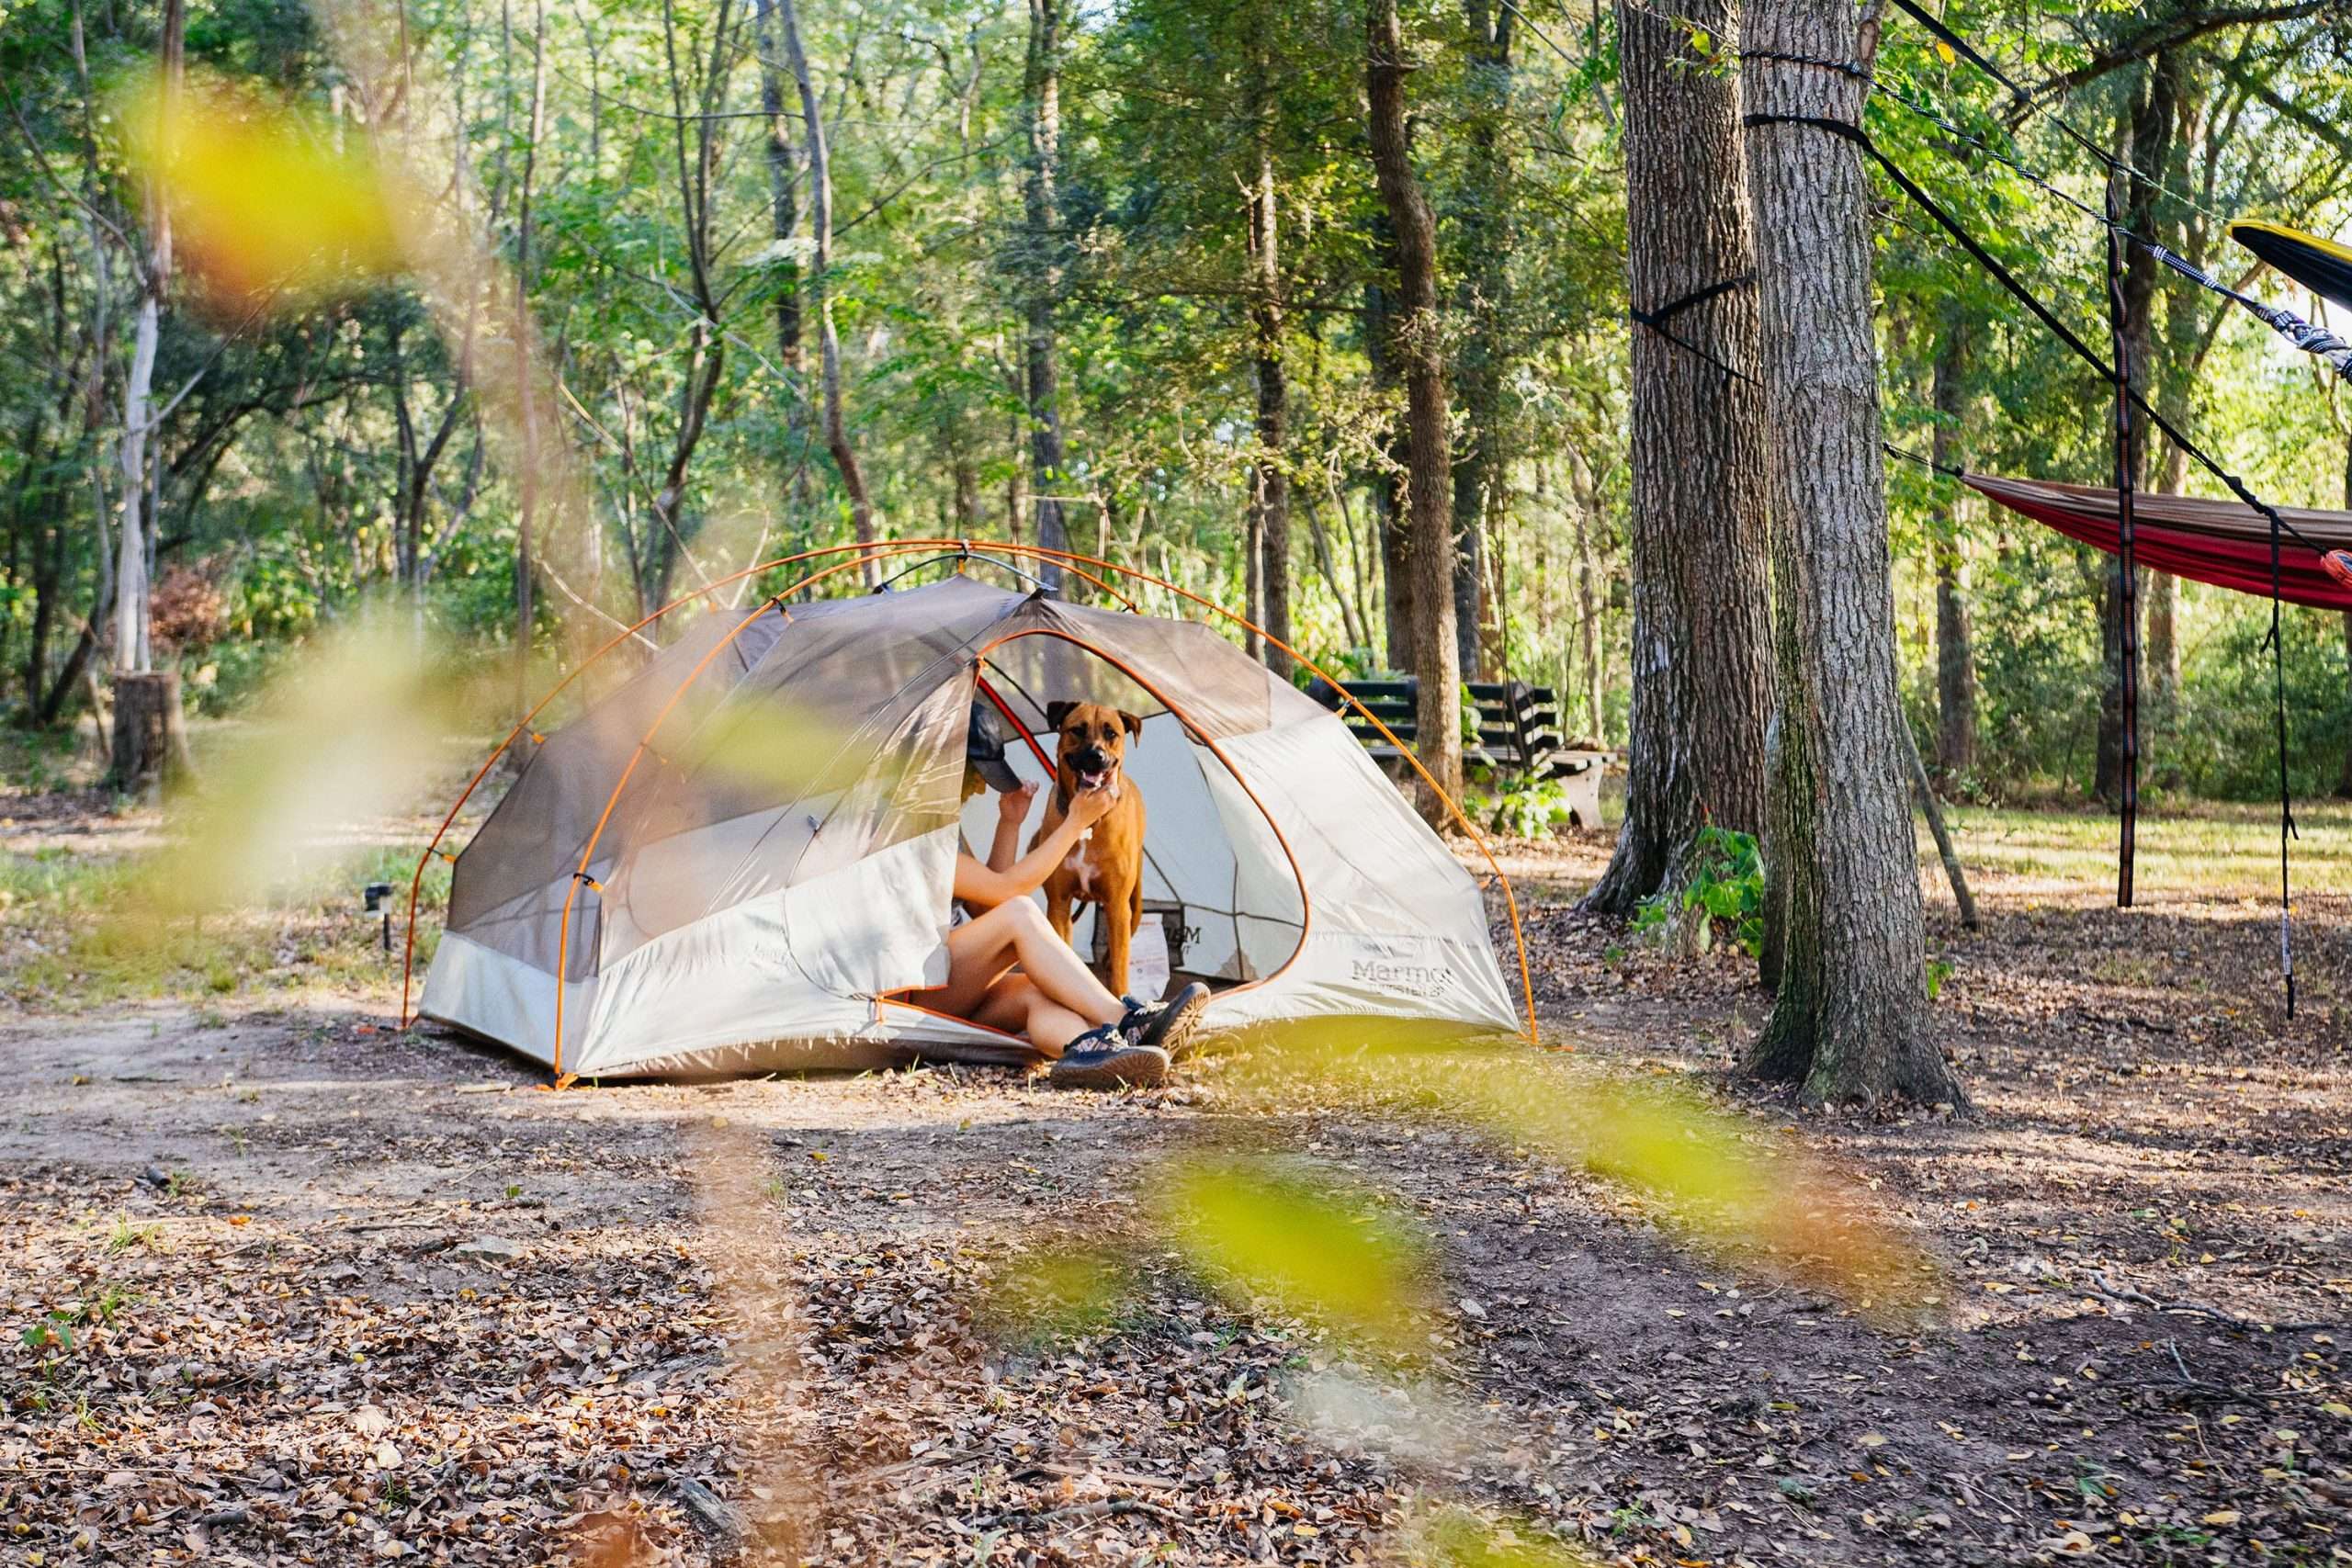 Can You Camp for Free in Texas?